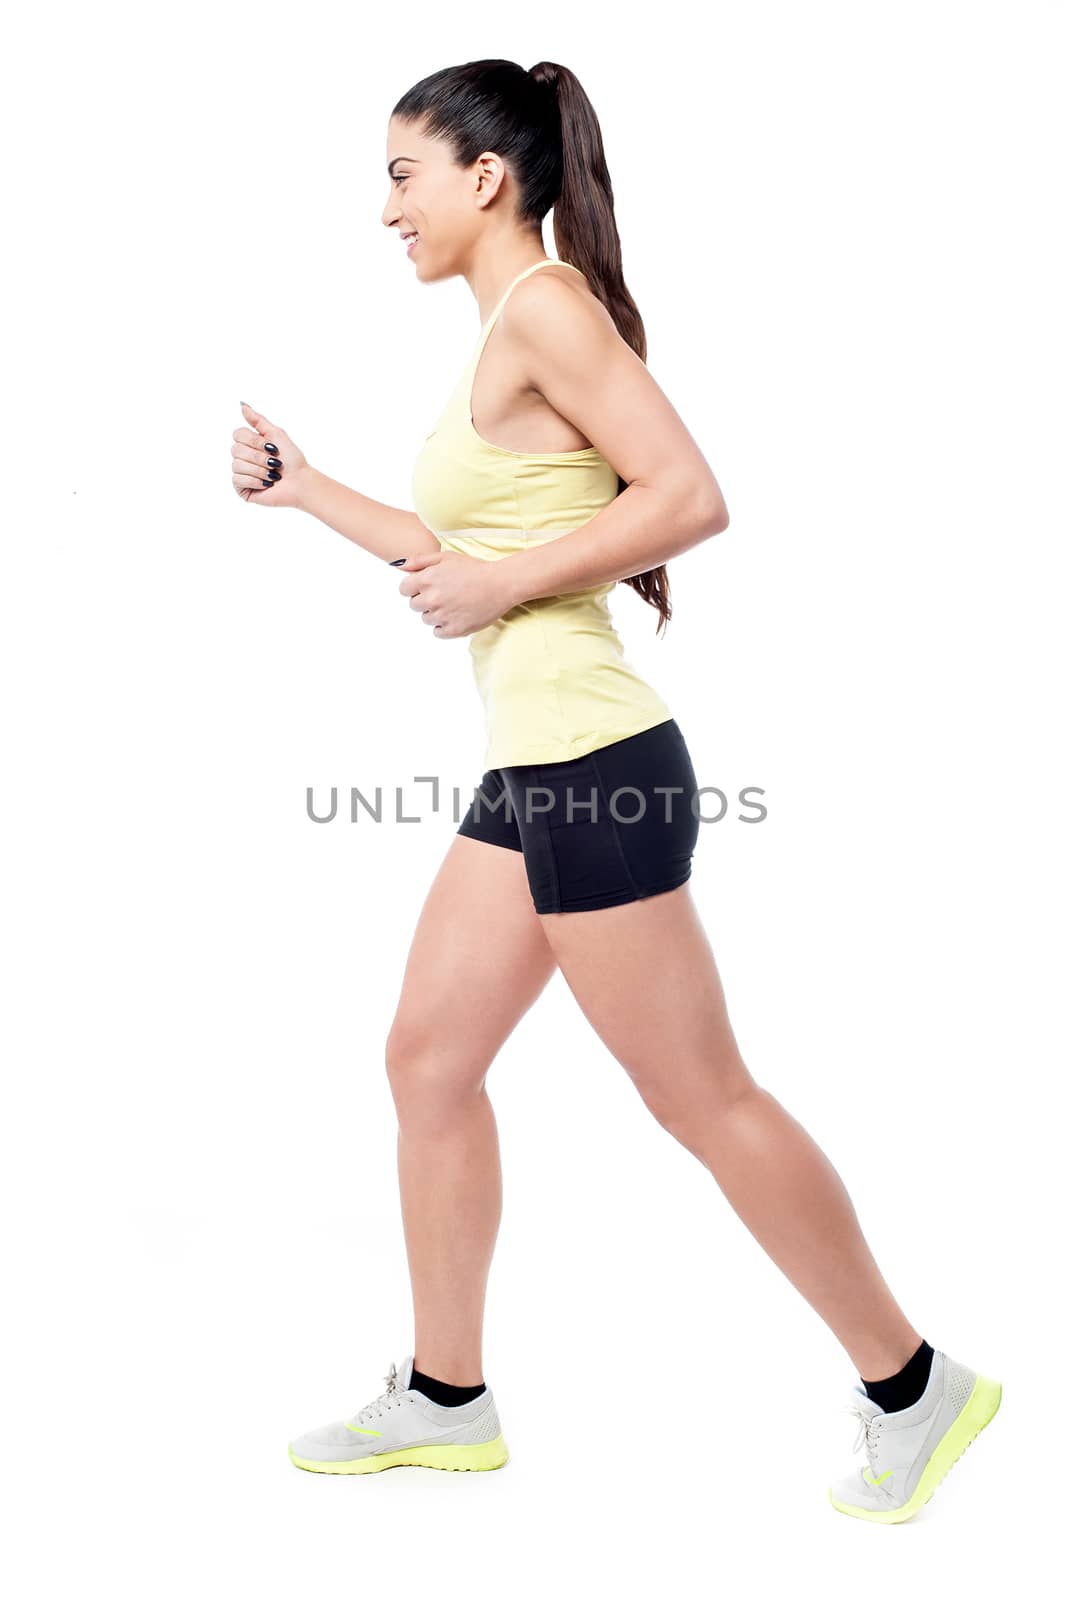 Sideways of young athletic woman jogging